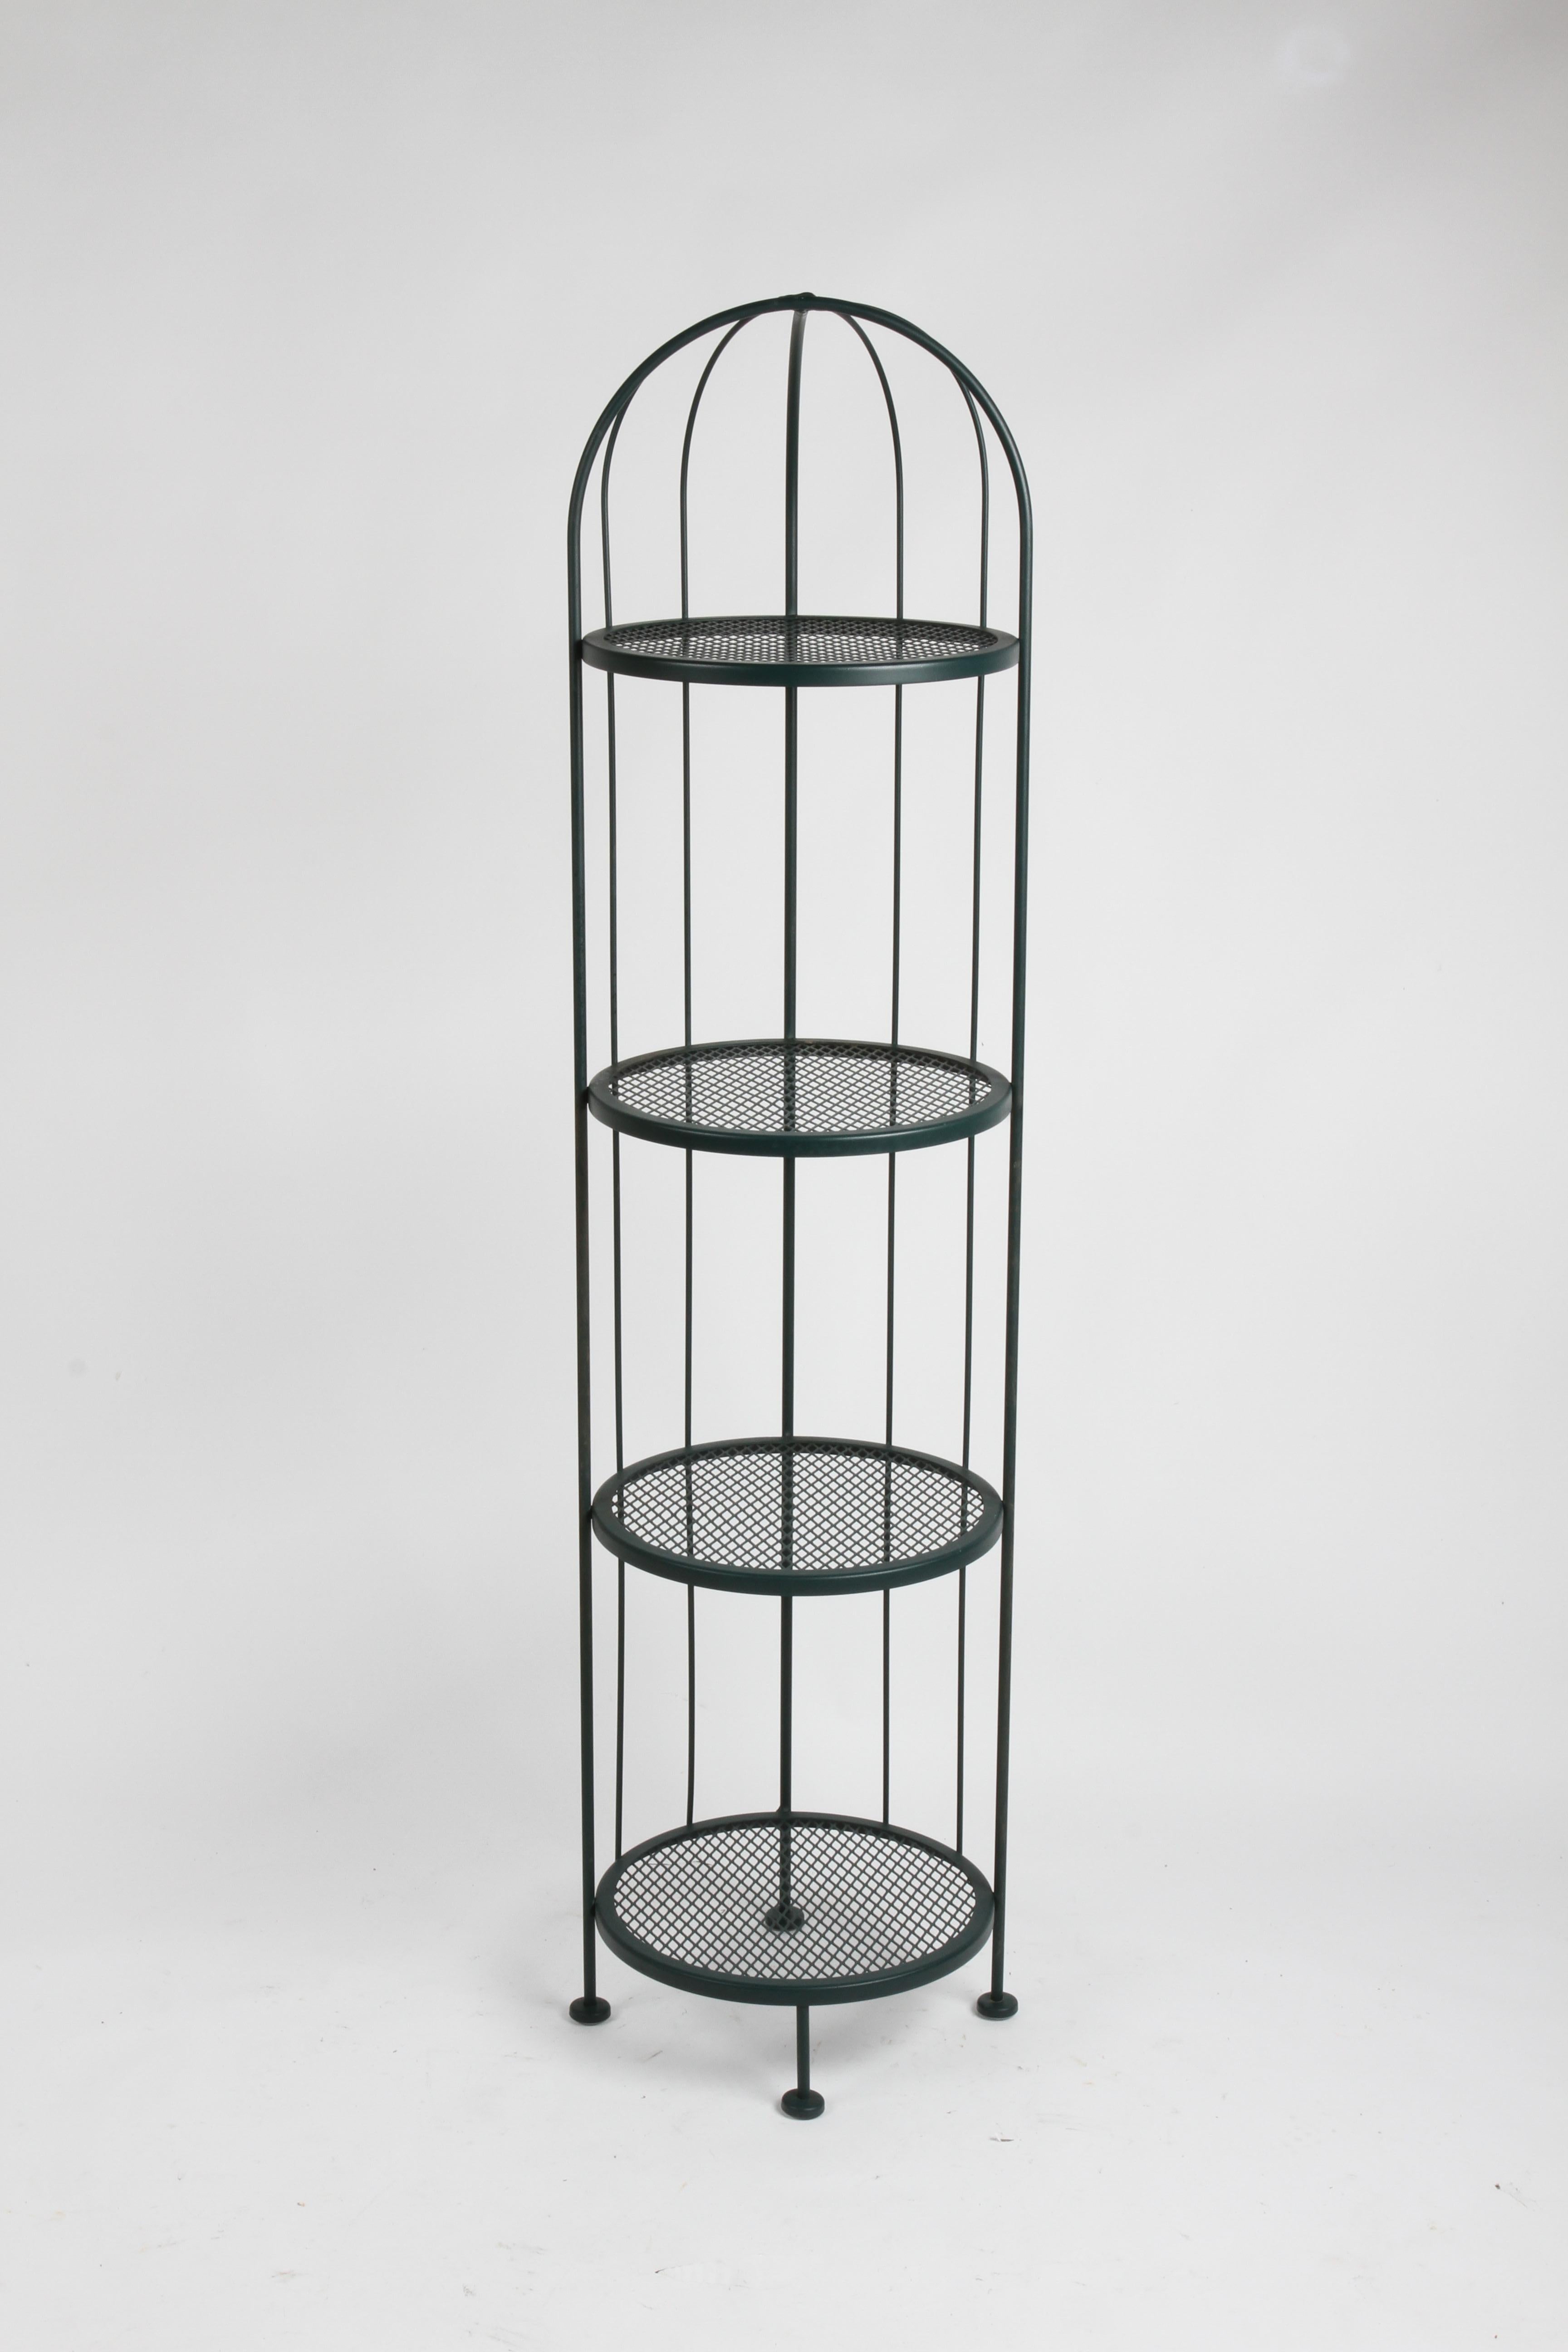 Mid-Century Woodard indoor - outdoor plant stand or display tower with four circular mesh shelves and metal canopy framework. 16